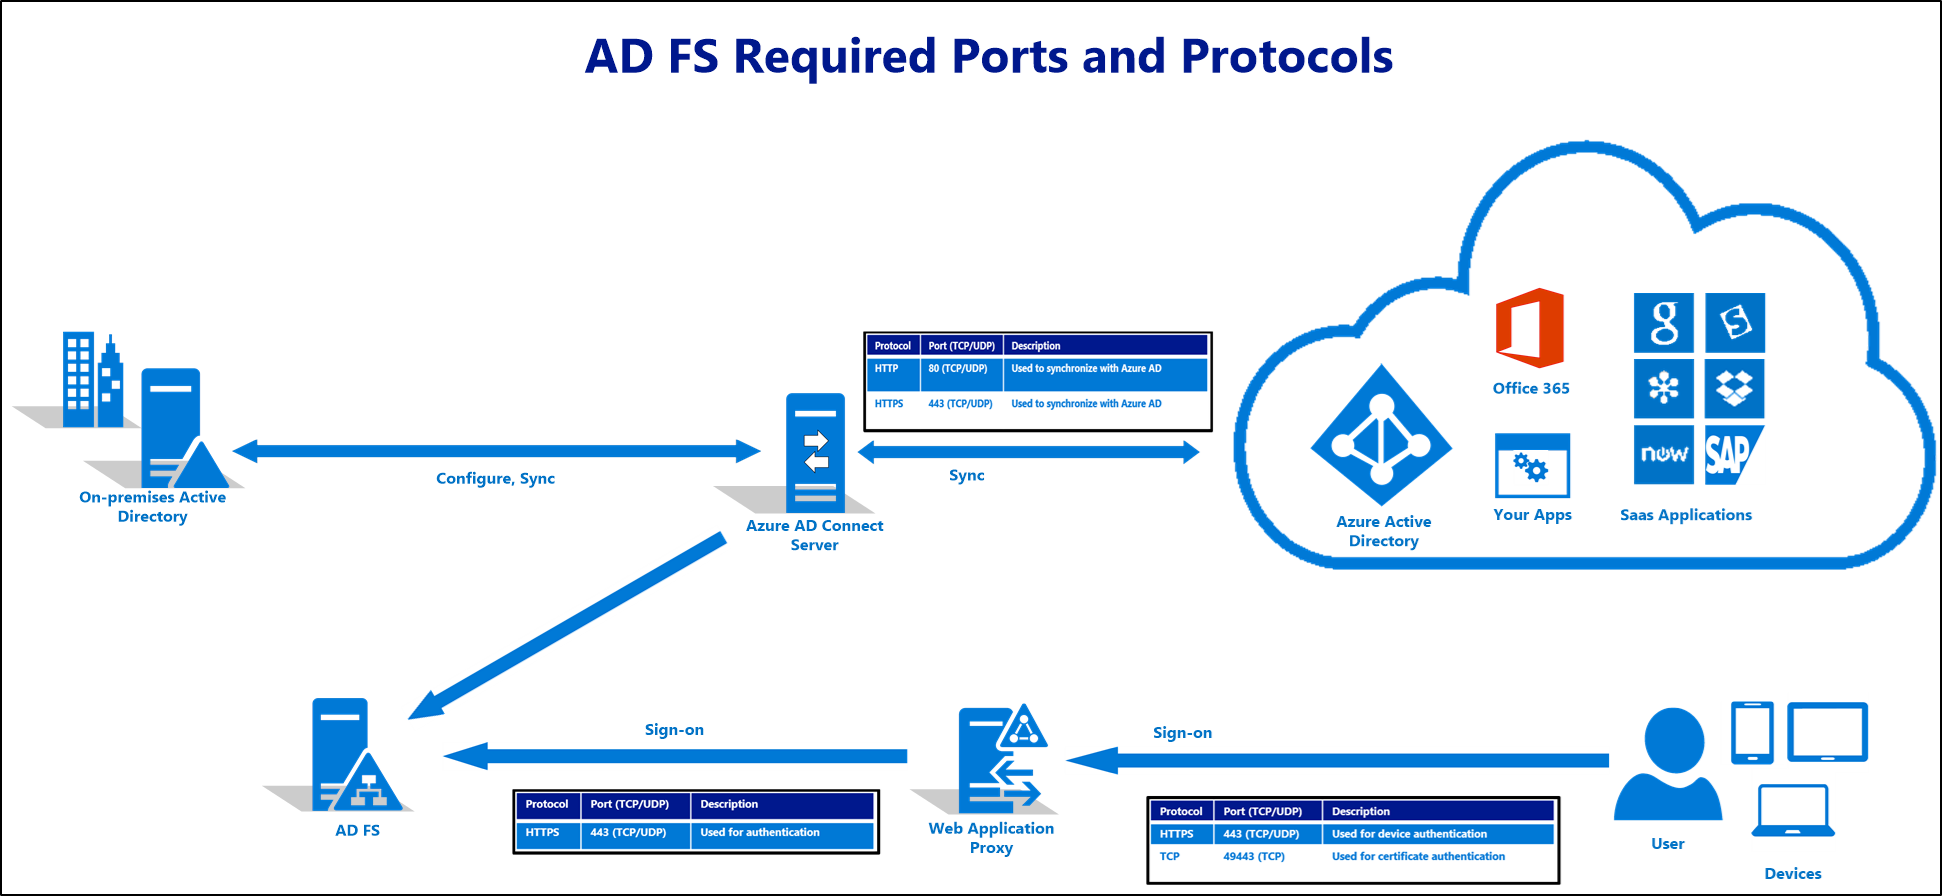 a diagram showing the required ports and protocols for an A D F S deployment.